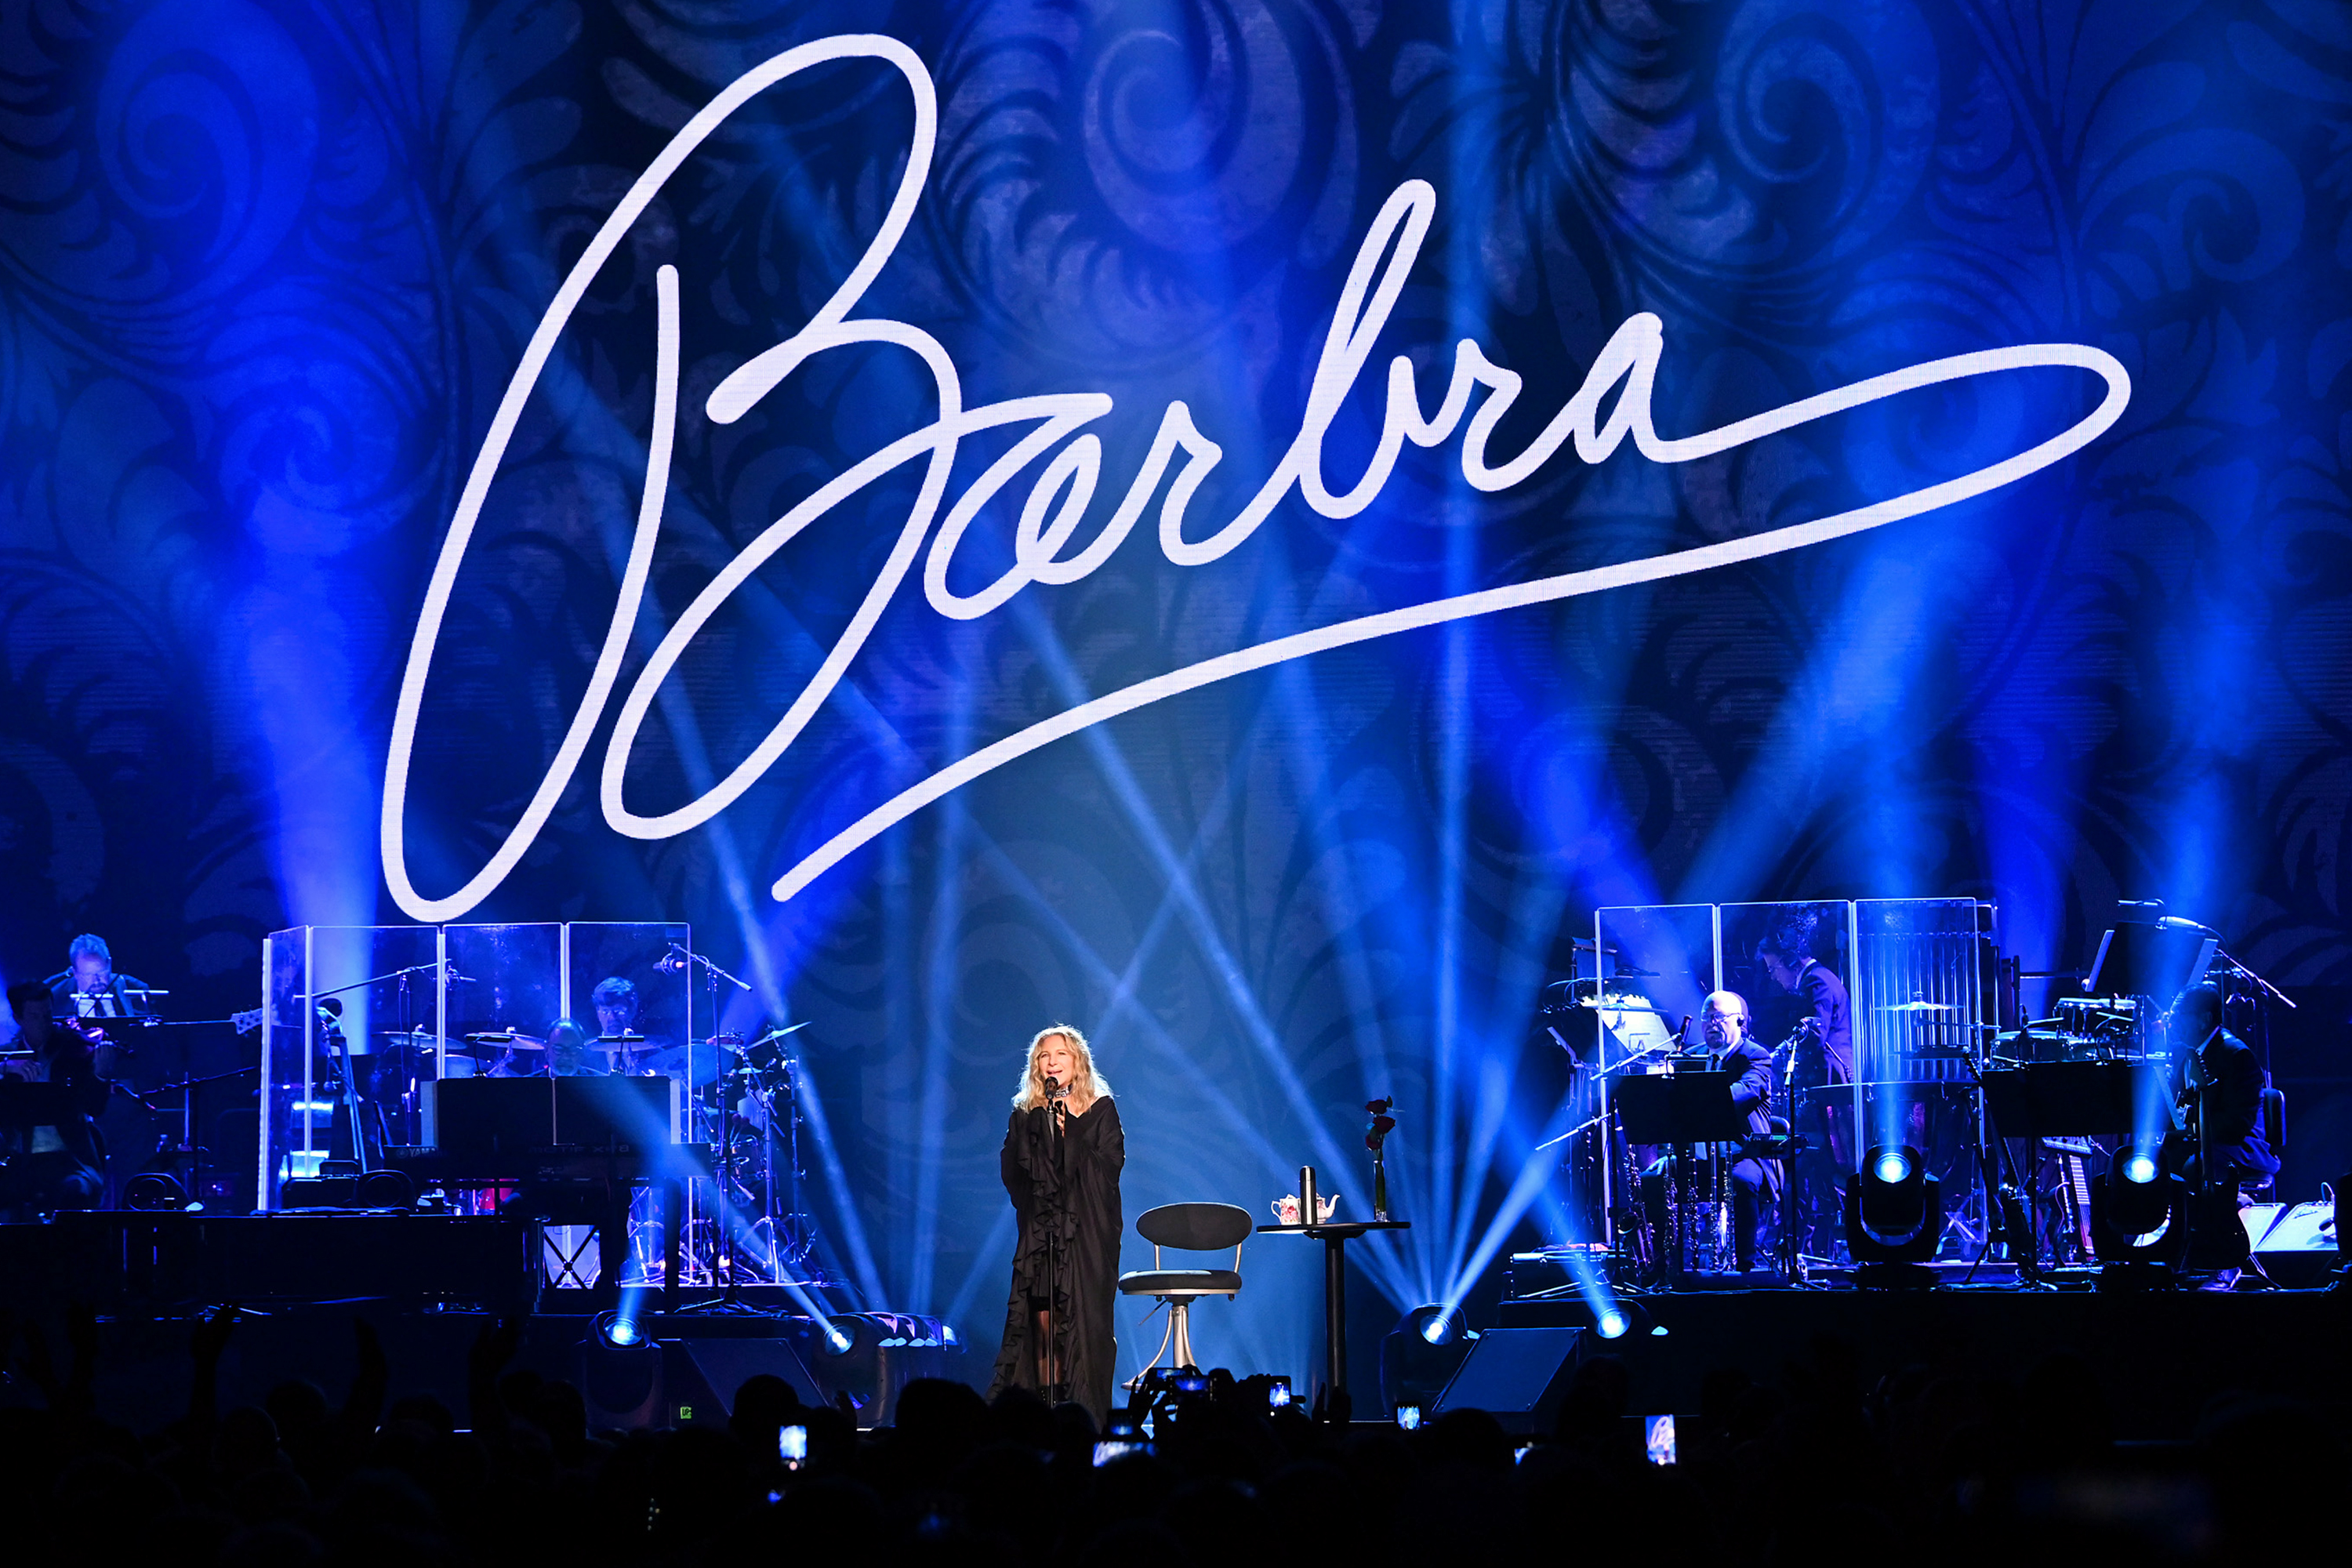 From Barbra to Beyoncé: A look at the appeal of divas